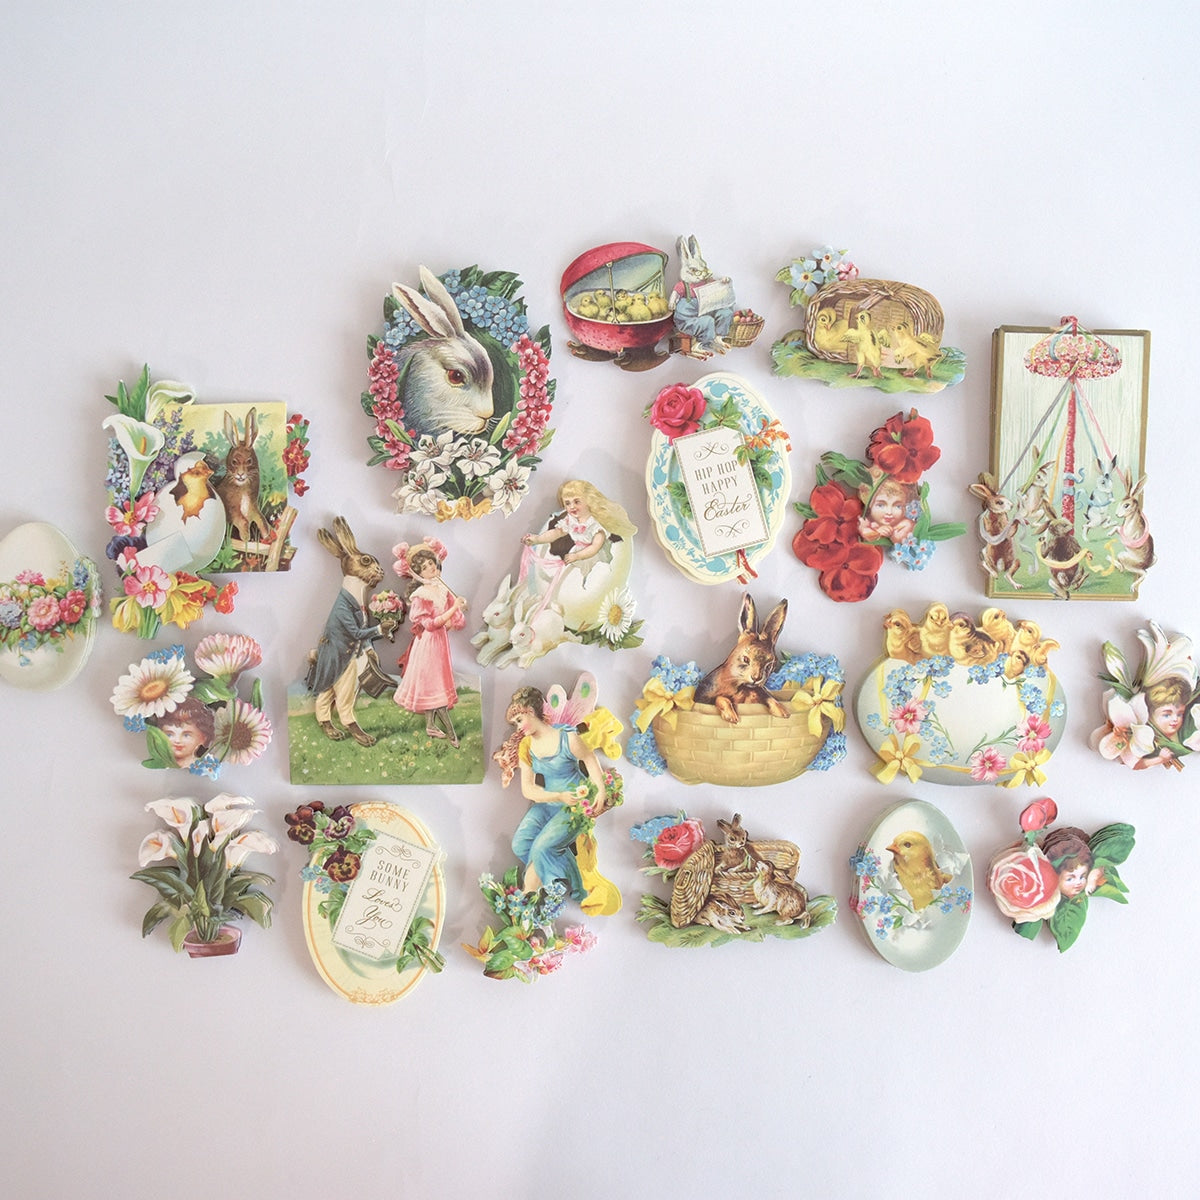 a collection of vintage easter decorations on a white background.